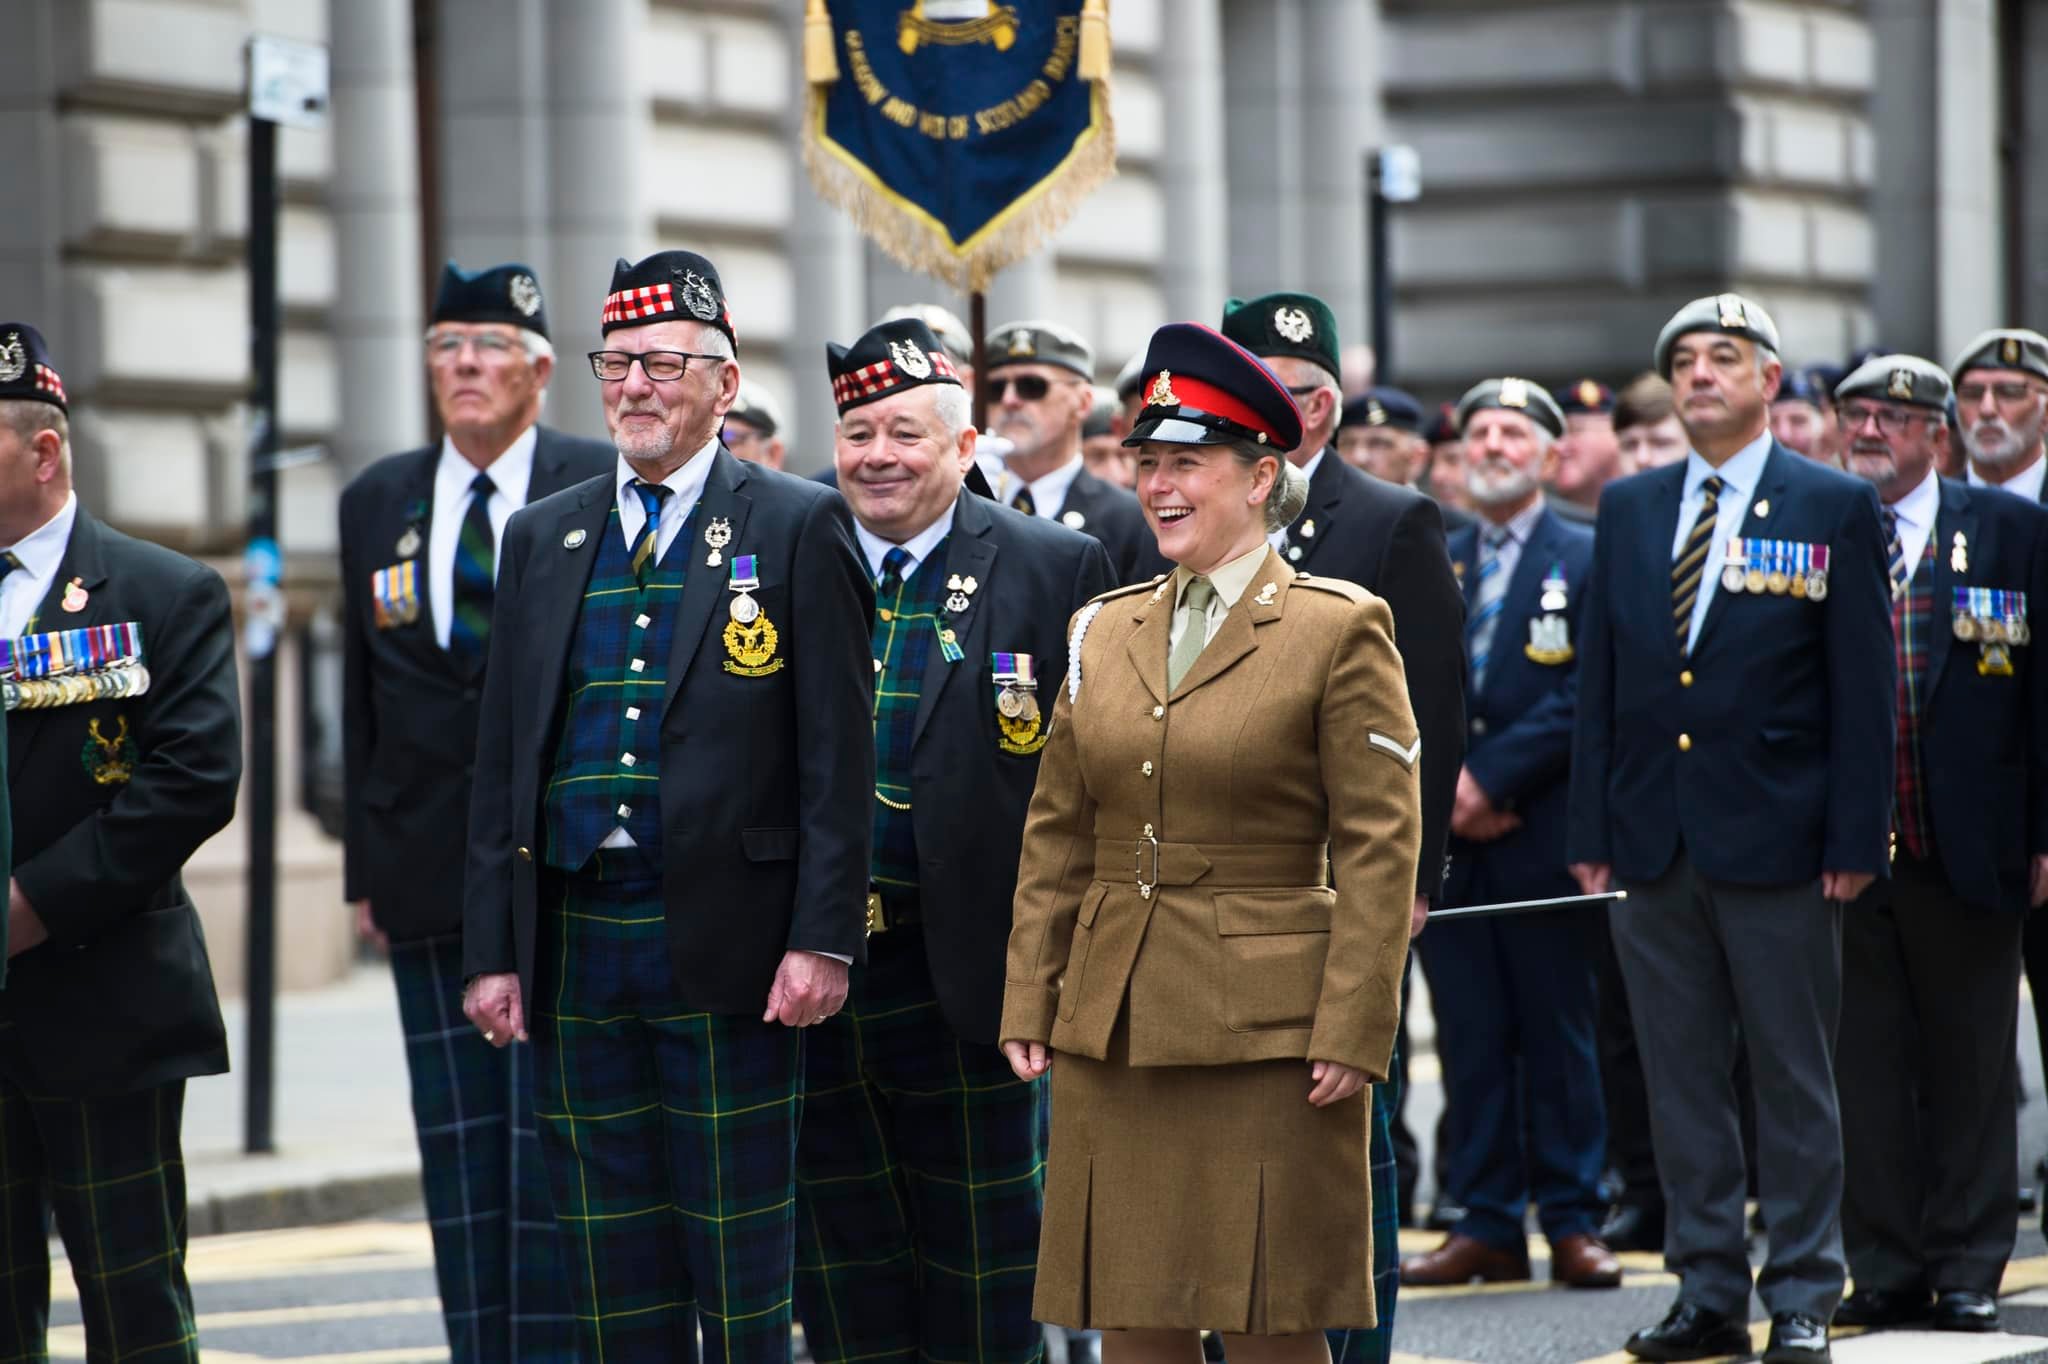 Reservists and veterans attending the Coronation service in Glasgow on Sunday 7 May.